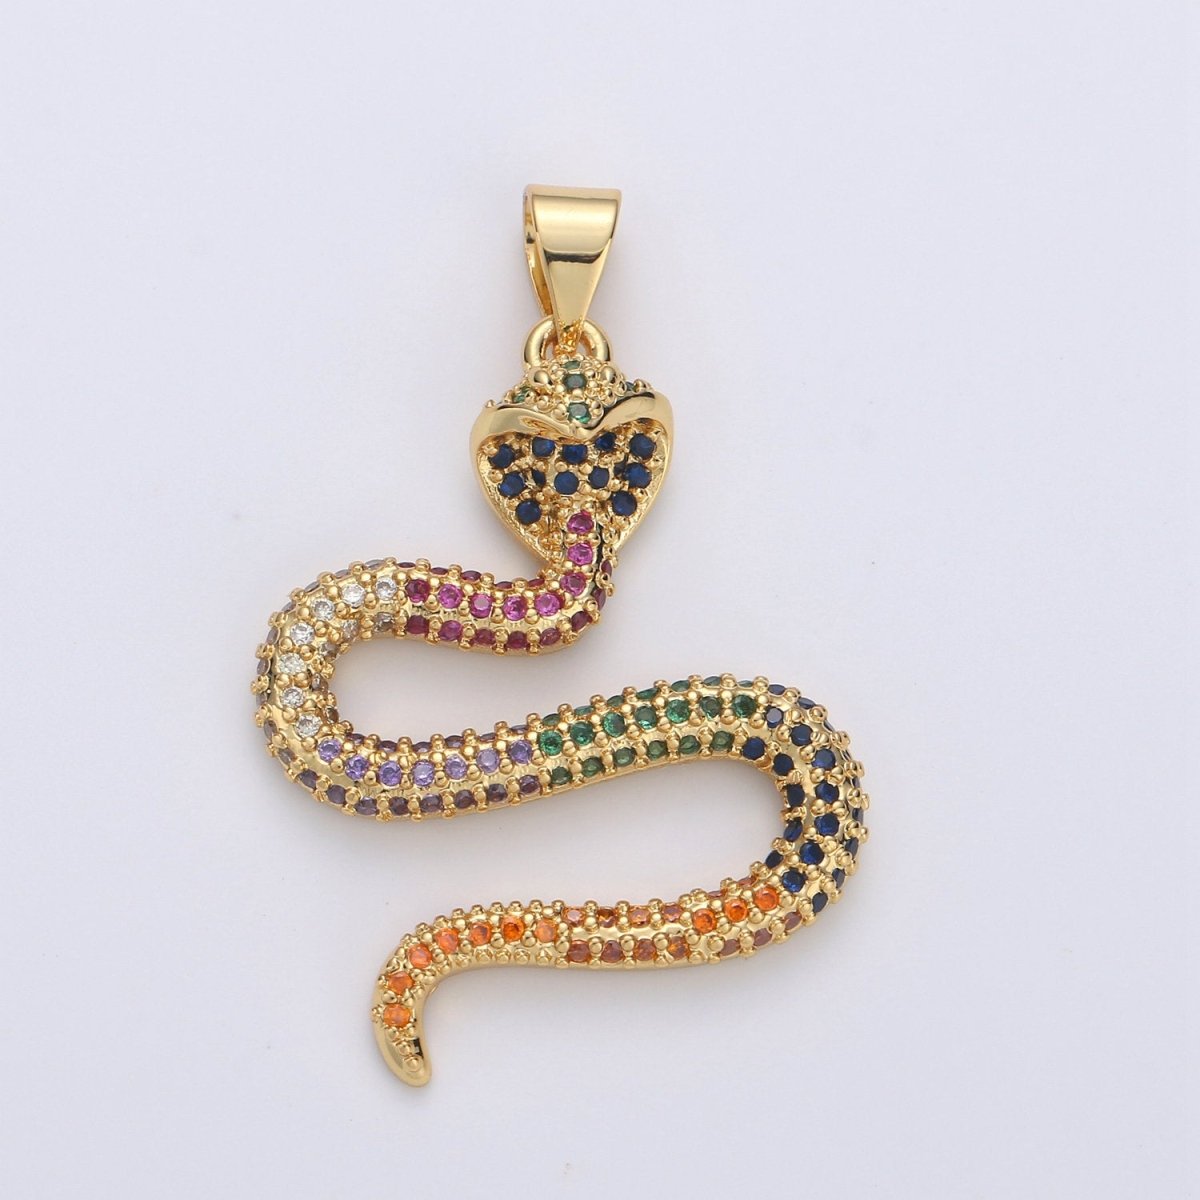 14K Gold Filled CZ Micro Pave Diamond Snake Pendant serpent Charm Layer Necklace w/ Bail Findings for Jewelry Making Supplies I-664 I-665 - DLUXCA